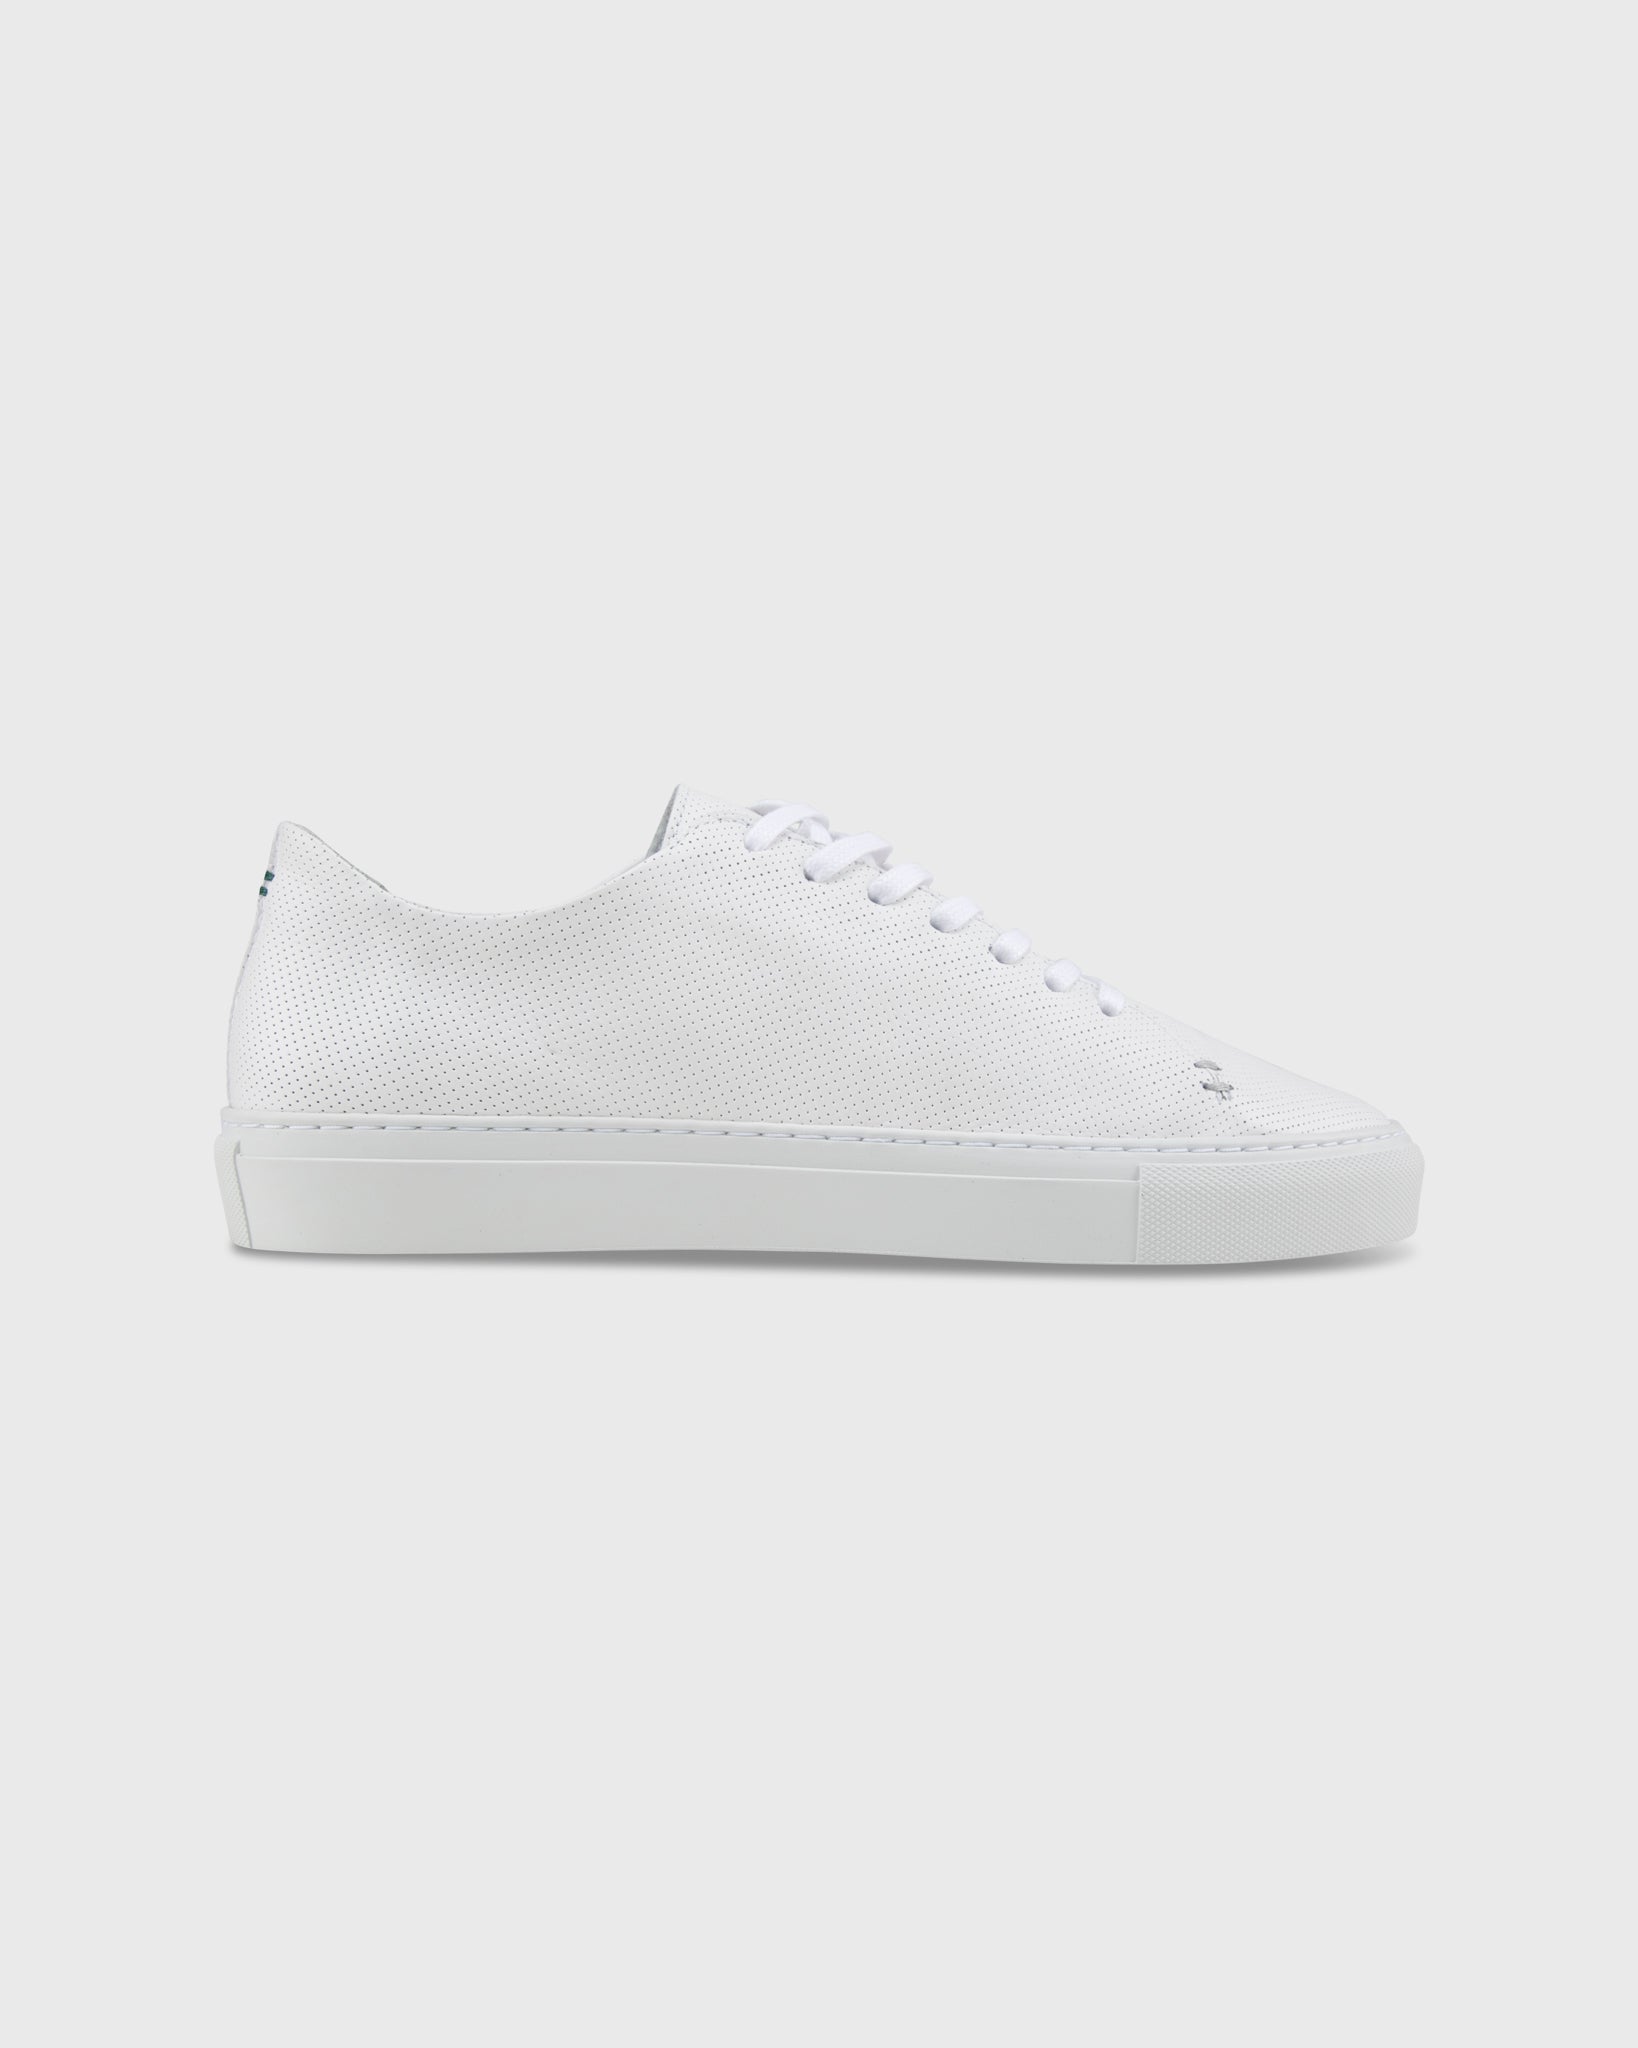 Low-Top Lace-Up Sneaker in White Perforated Leather